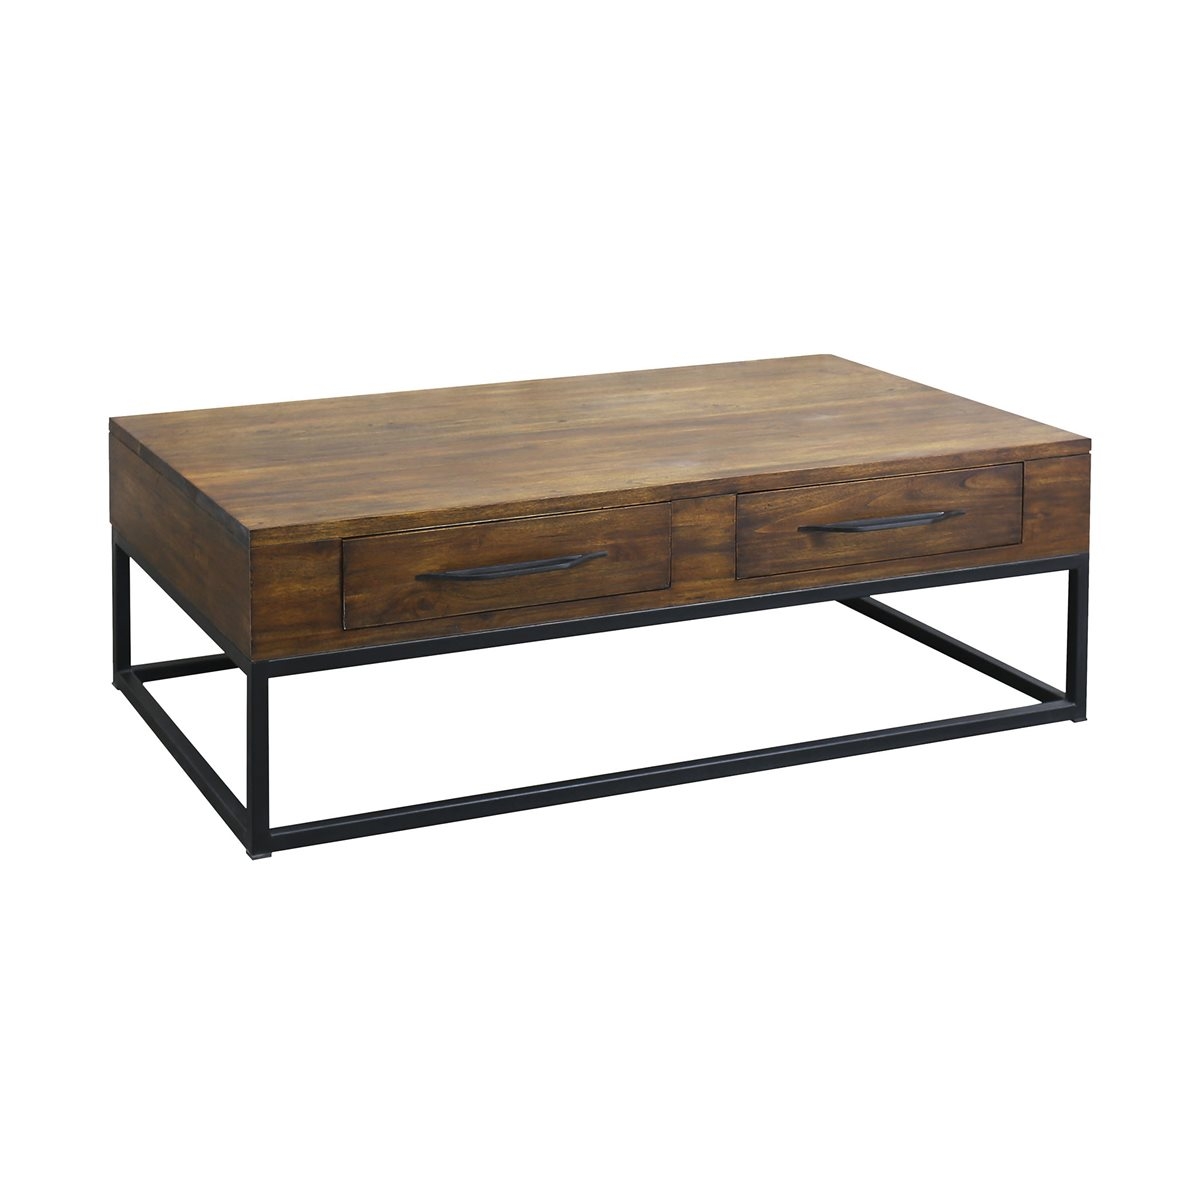 STANLEY 2-DRAWER COFFEE TABLE IN WOOD AND METAL - Image 0